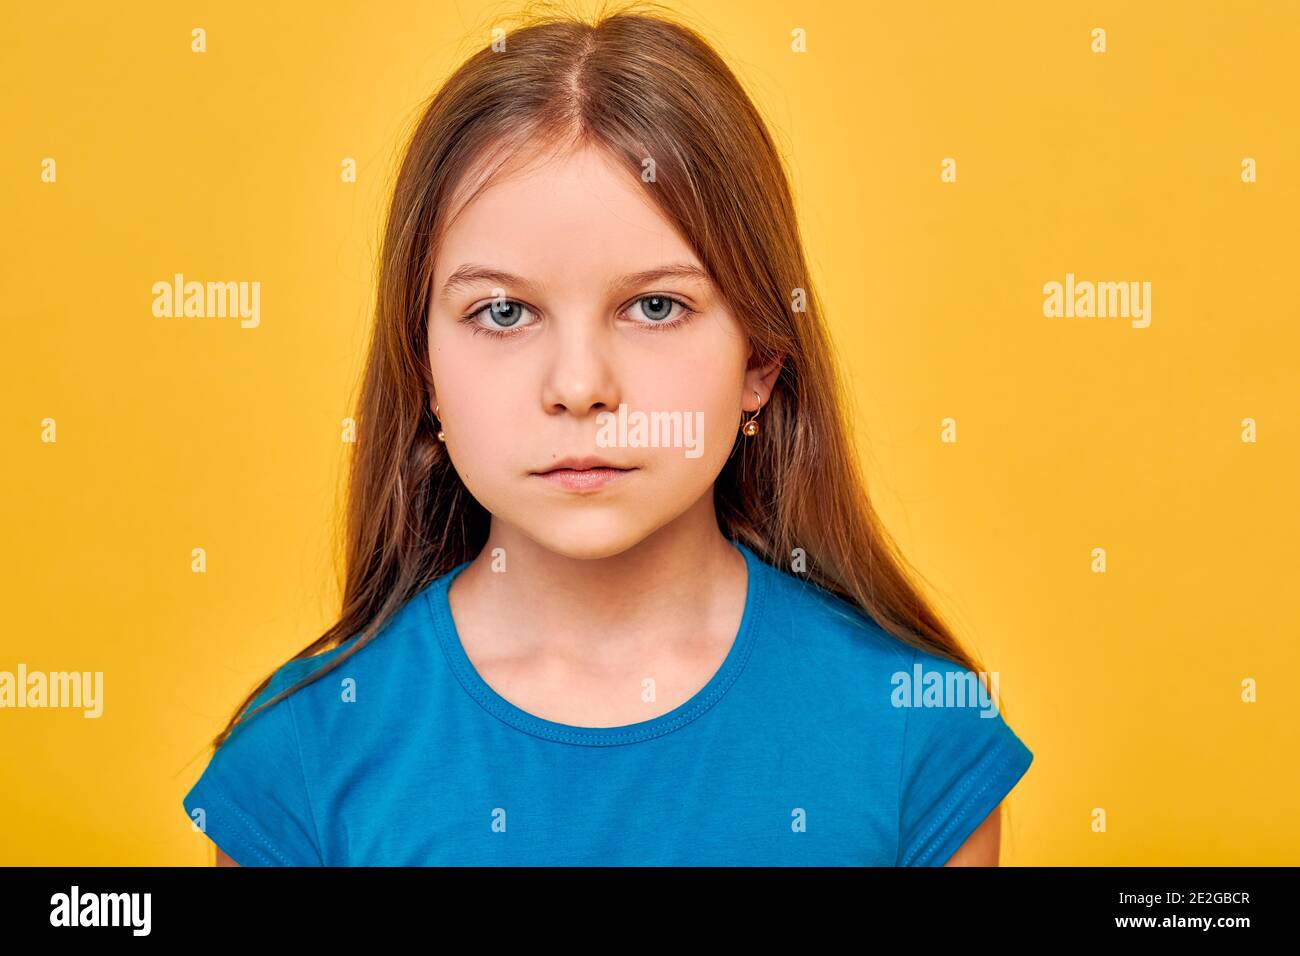 Little girl wearing a blue t-shirt, caucasian ethnicity, serious and looking at the camera, on fortune gold background Stock Photo